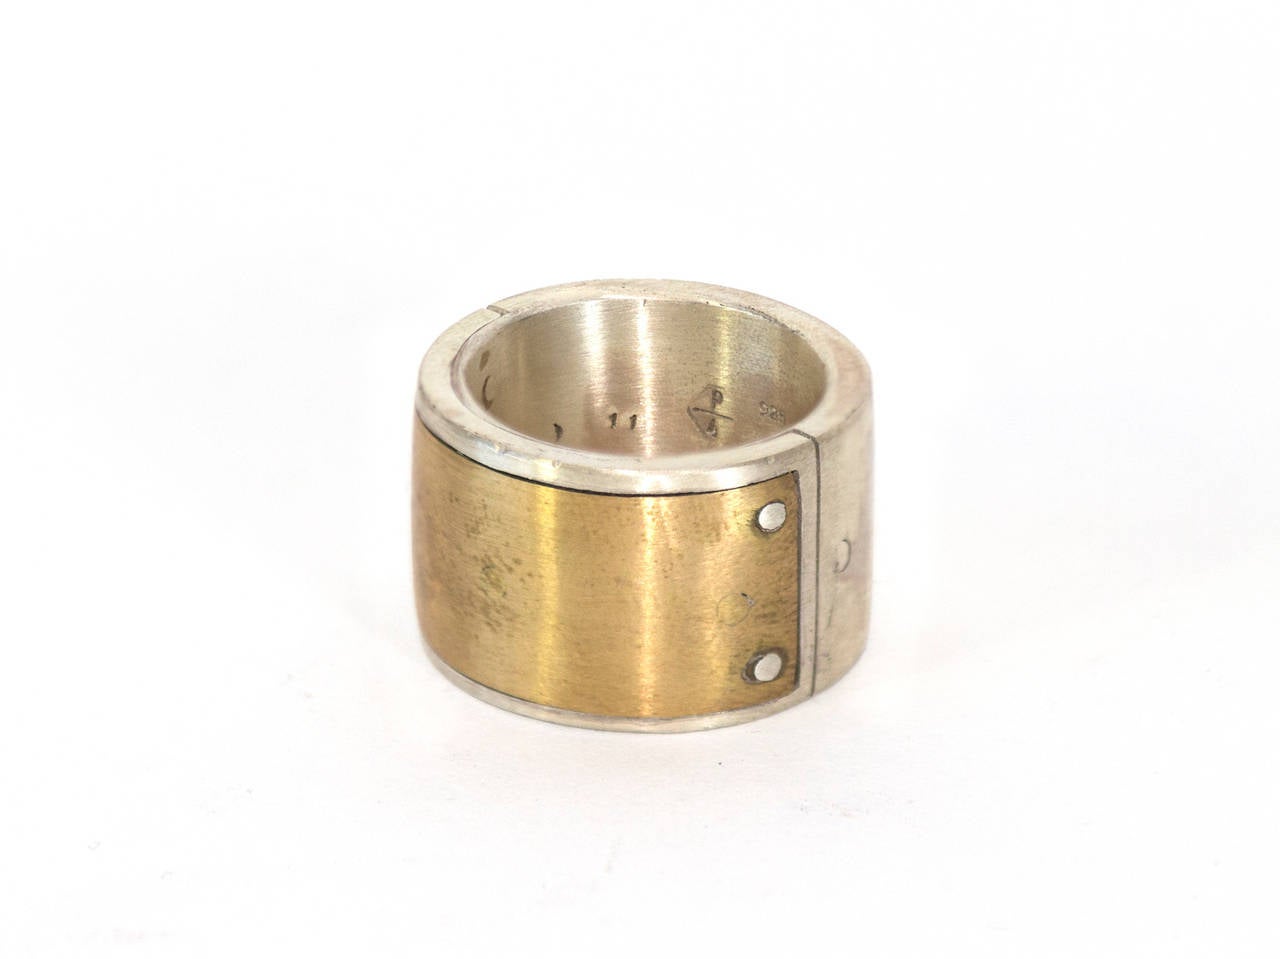 Sistema Ring – 17, by P/4 in matte sterling and matte brass. 

Size: 11